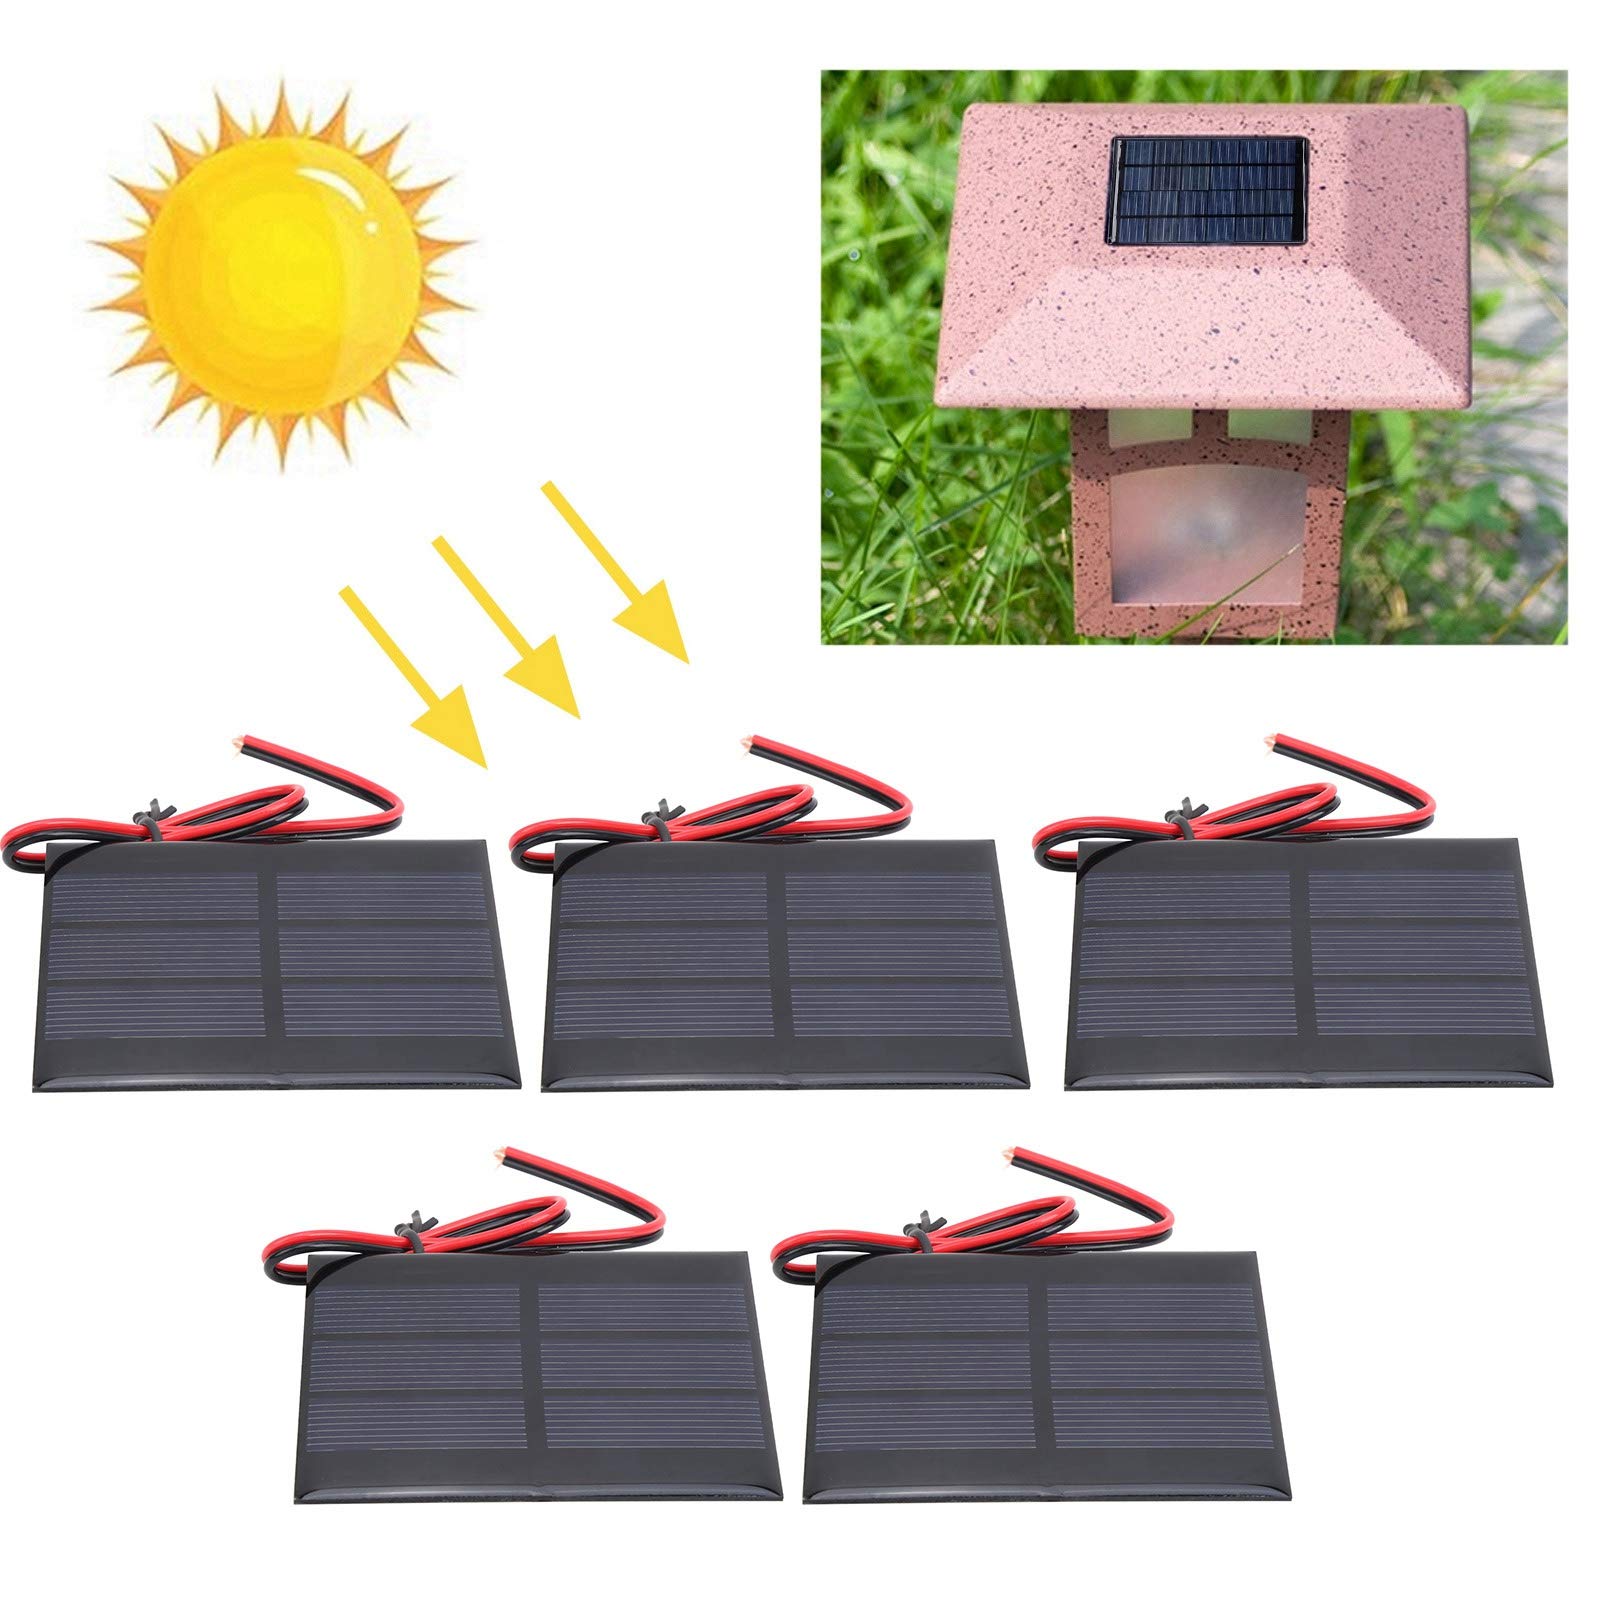 5Pcs Portable Solar Panel, Mini Solar Panel Battery Cell Board Module, Suitable for Making Solar Toys, DIY, with 30cm Wire 60 x 80 x 3MM DC 0.65W 1.5V